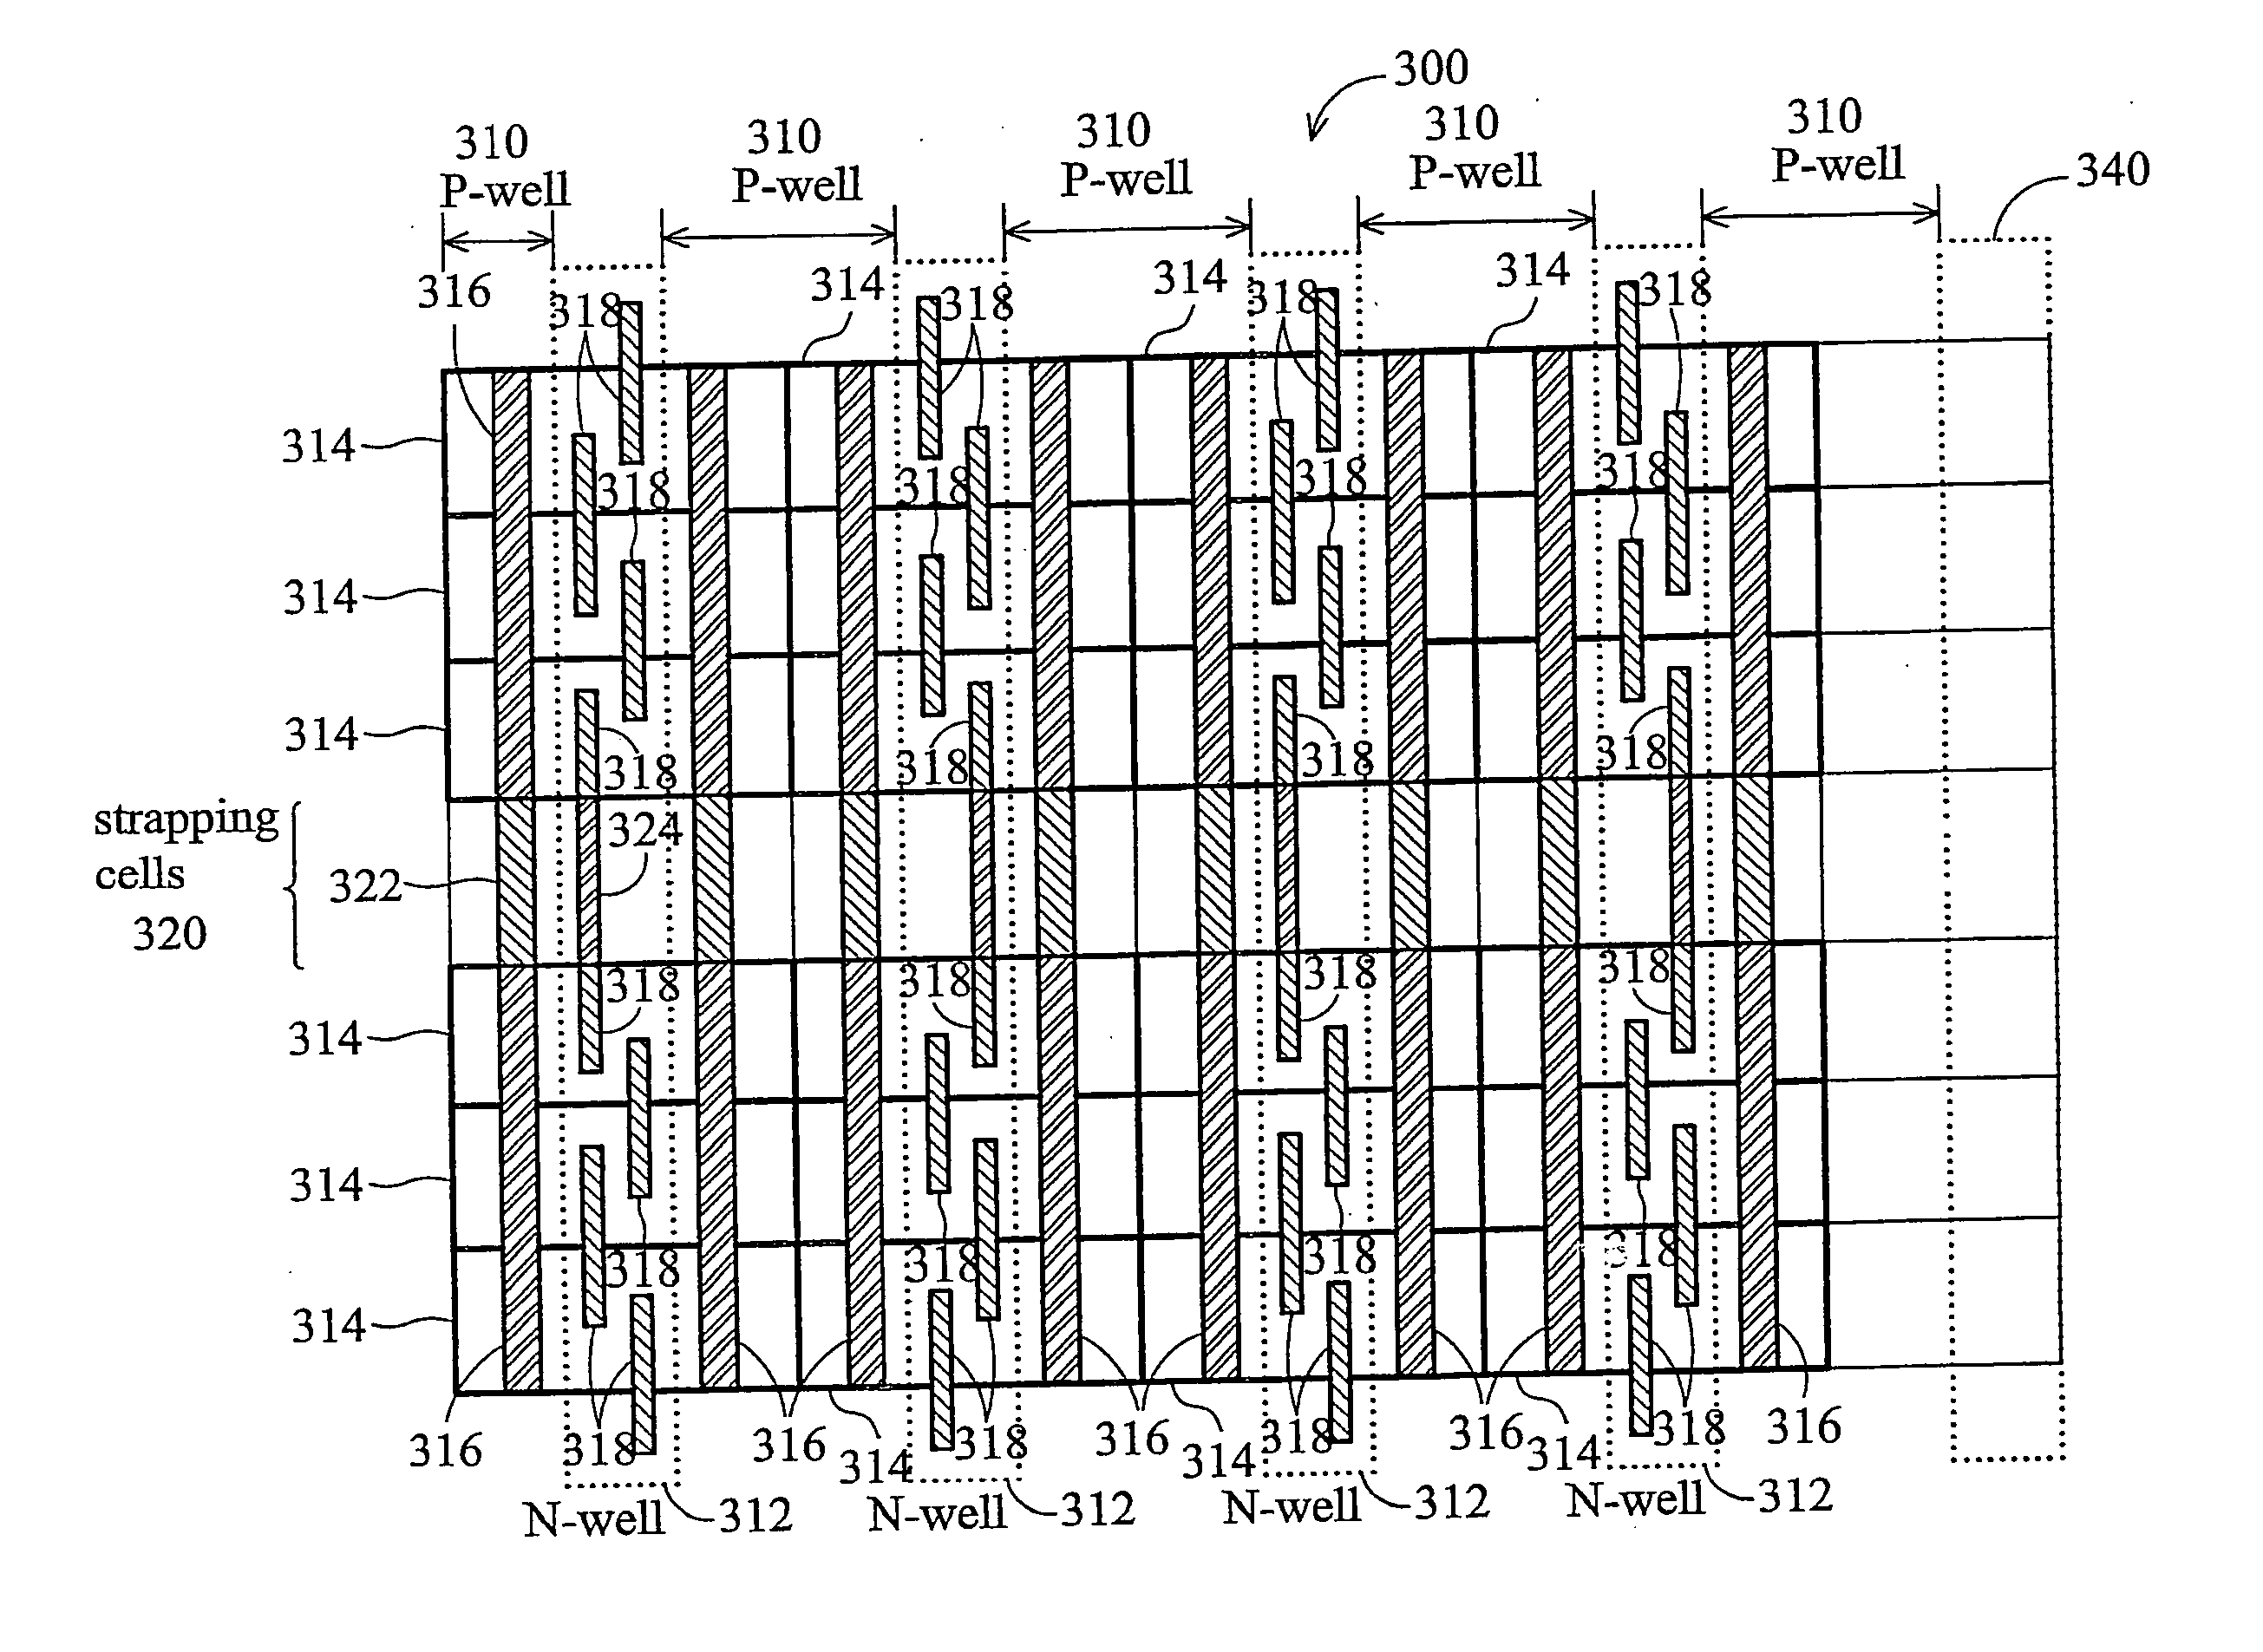 Memory array structure with strapping cells